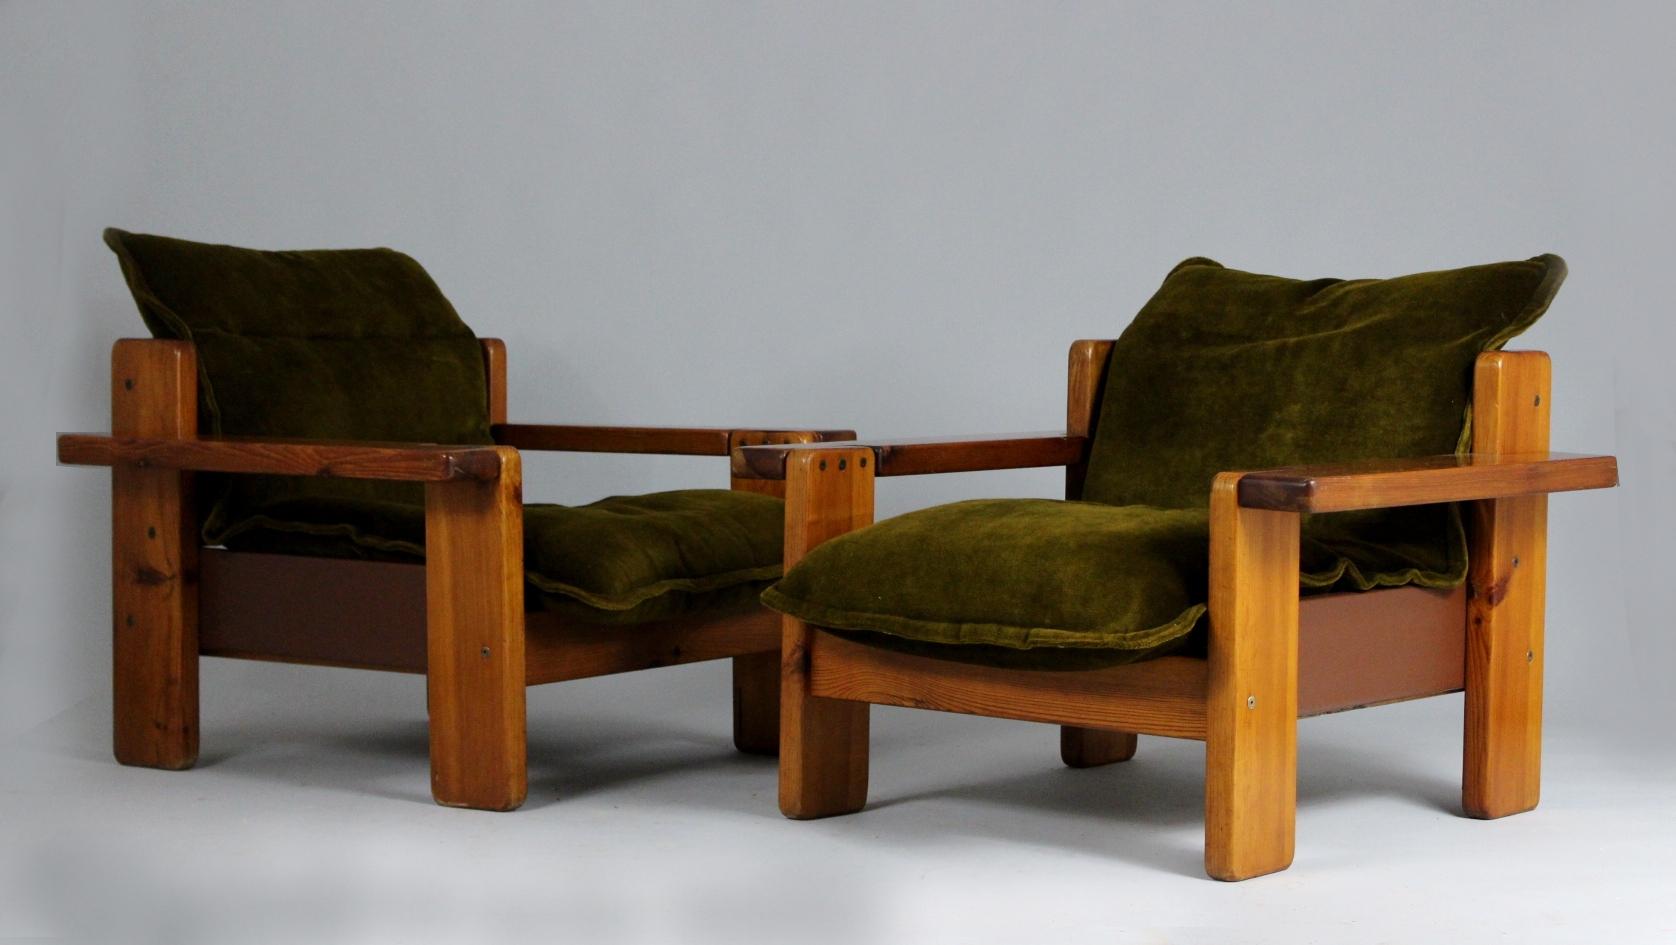 Pair of club chairs from the 1970s. Base is made from wood, green upholstery. Chairs are in very good original condition.